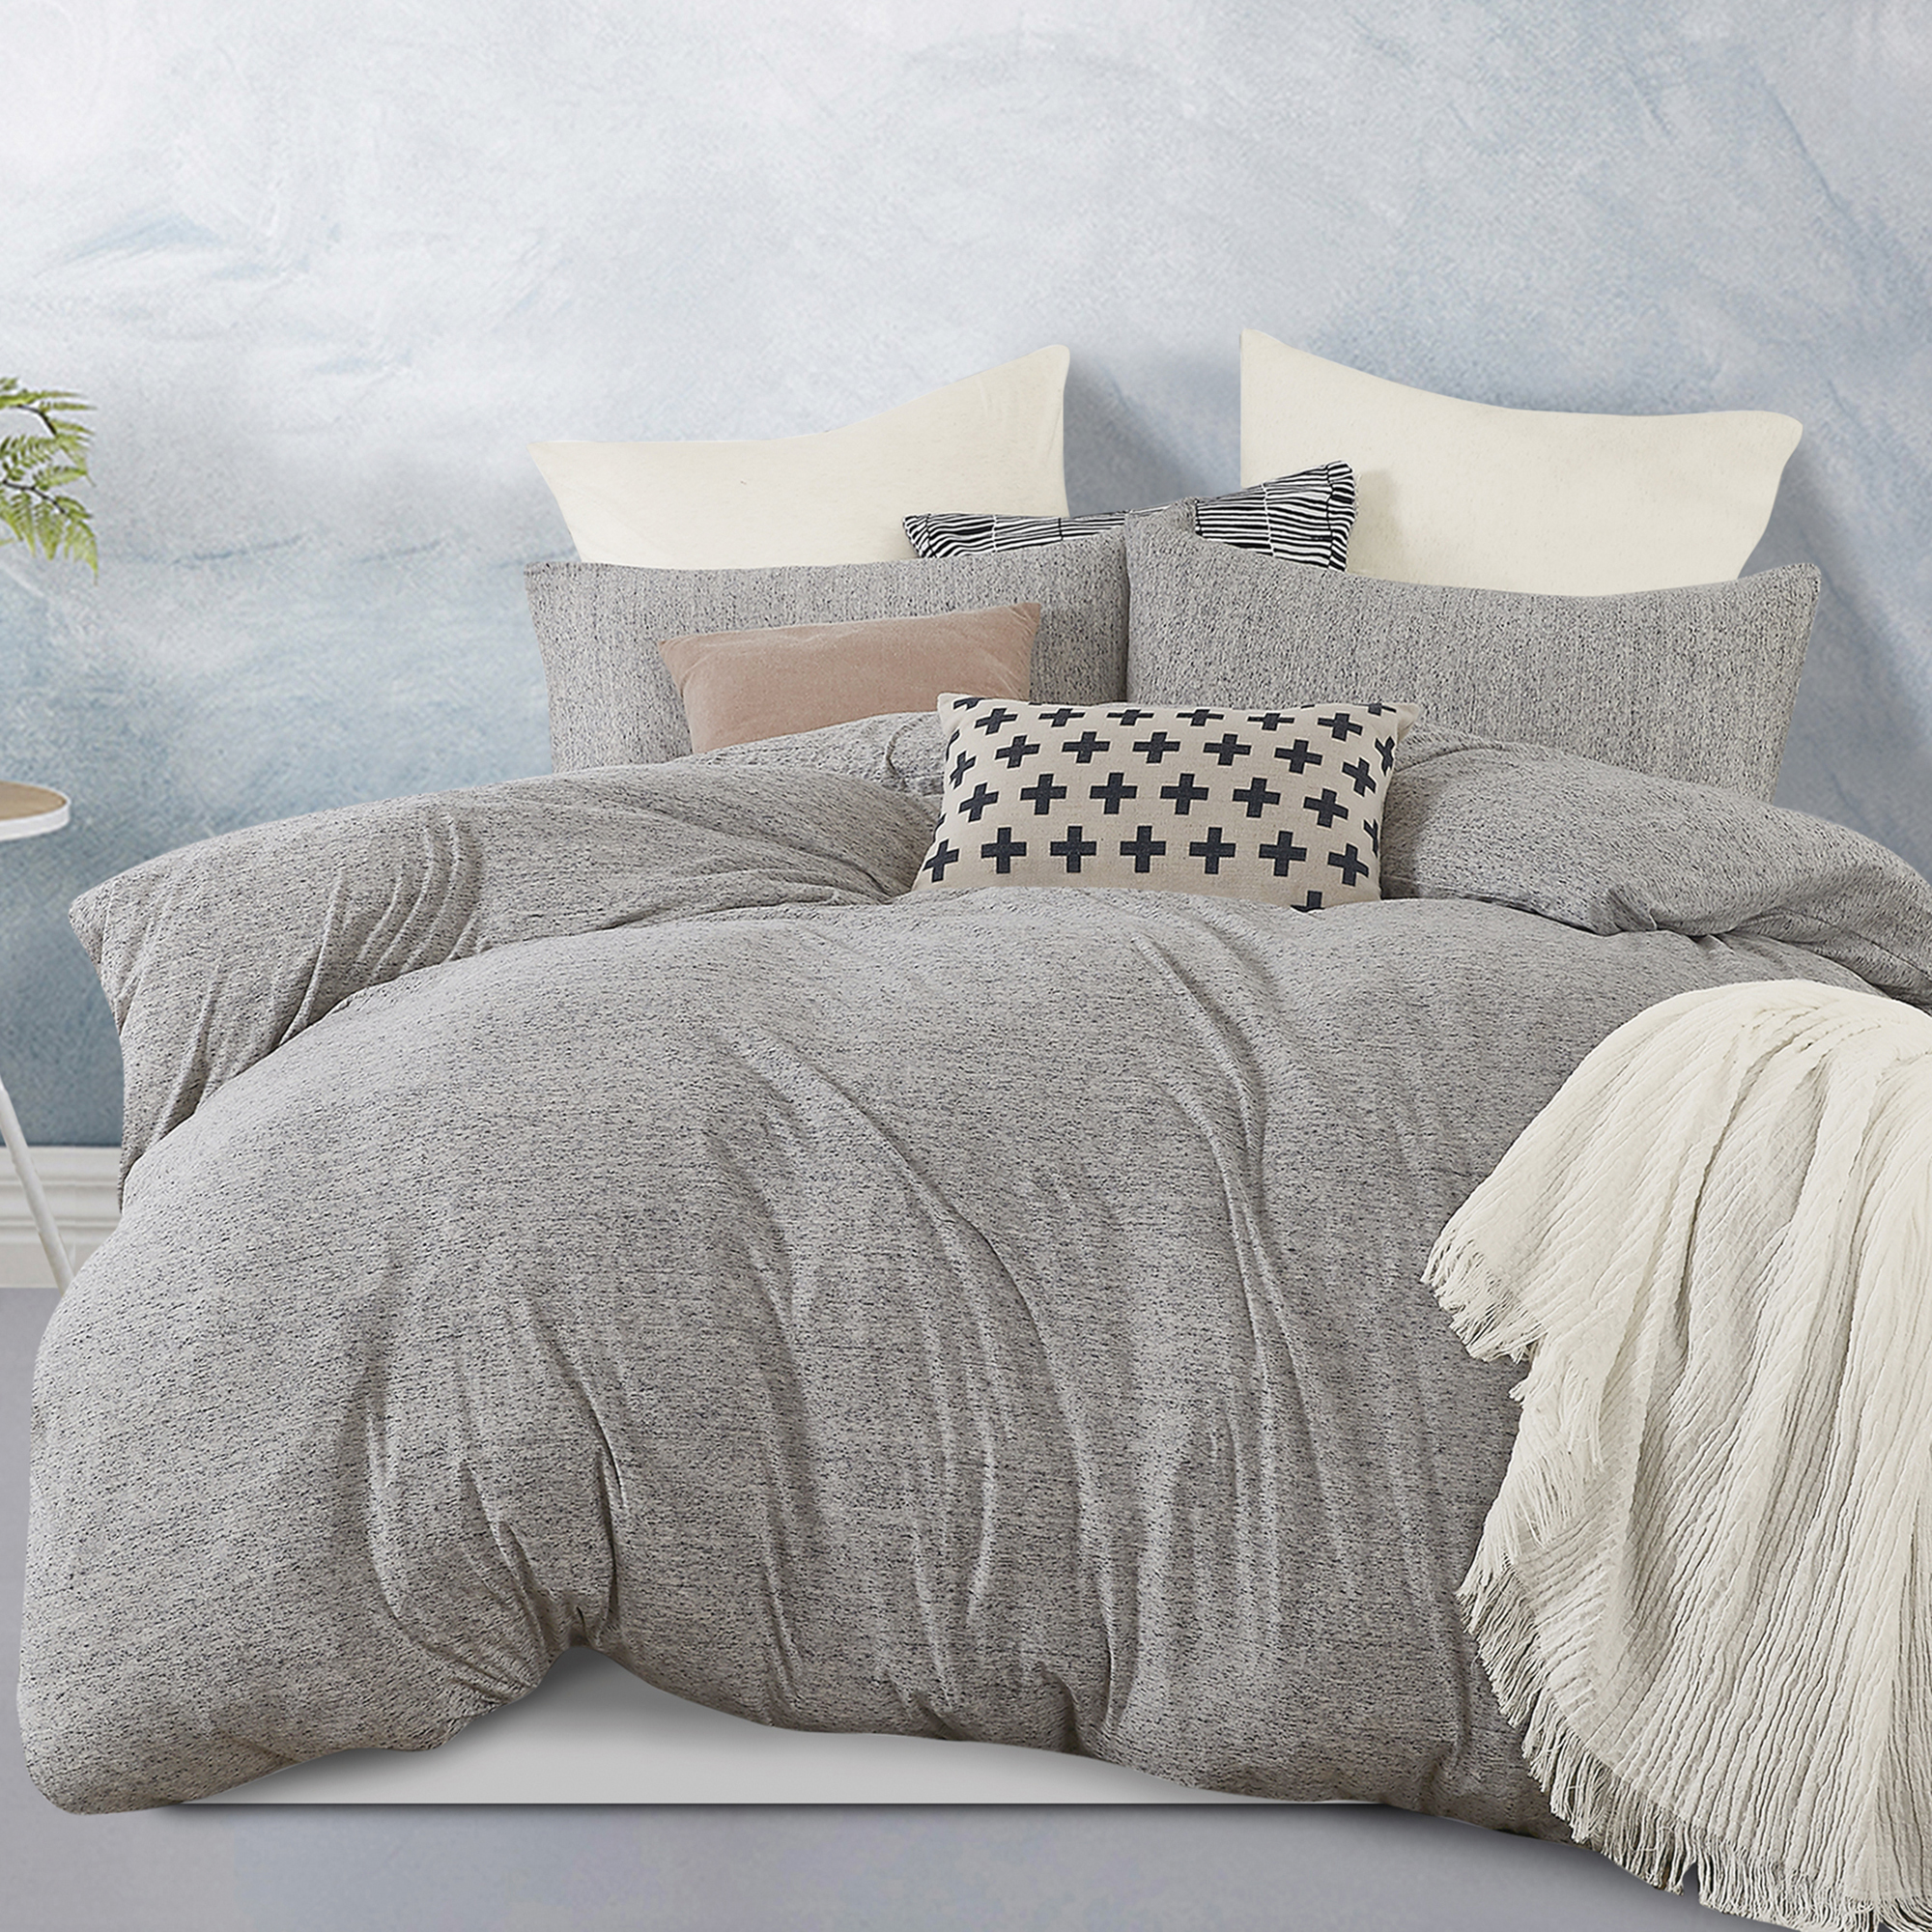 Gioia Casa Grey Marble Jersey Cotton Quilt Cover Set Reviews